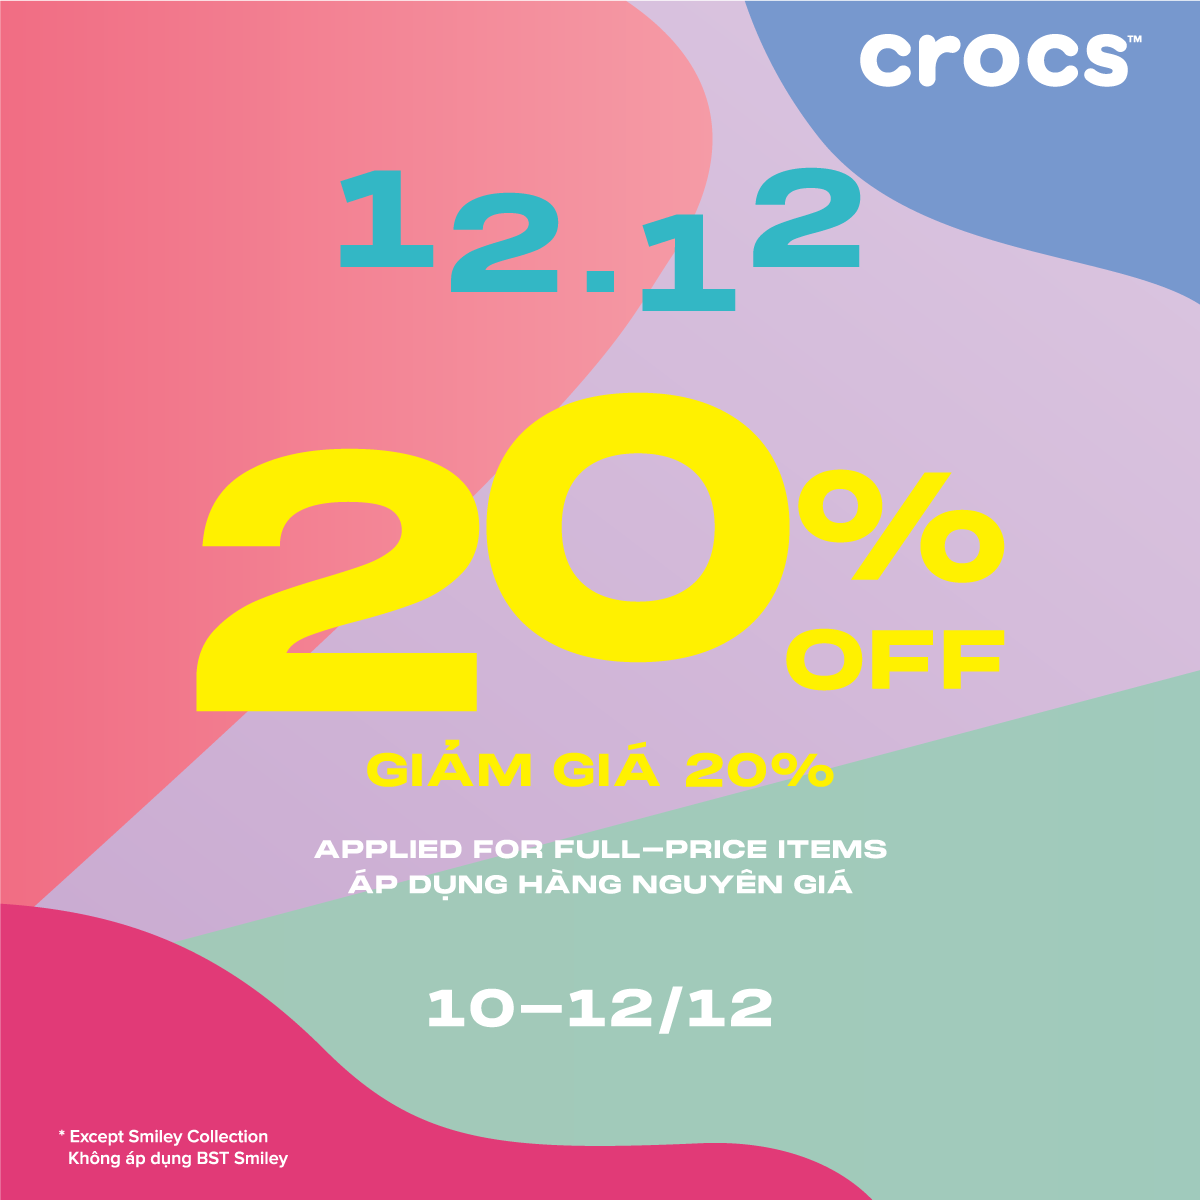 🎉 12.12 - ATTRACTIVE PROMOTION FROM CROCS: DISCOUNT 20% ALL ITEMS 🎉